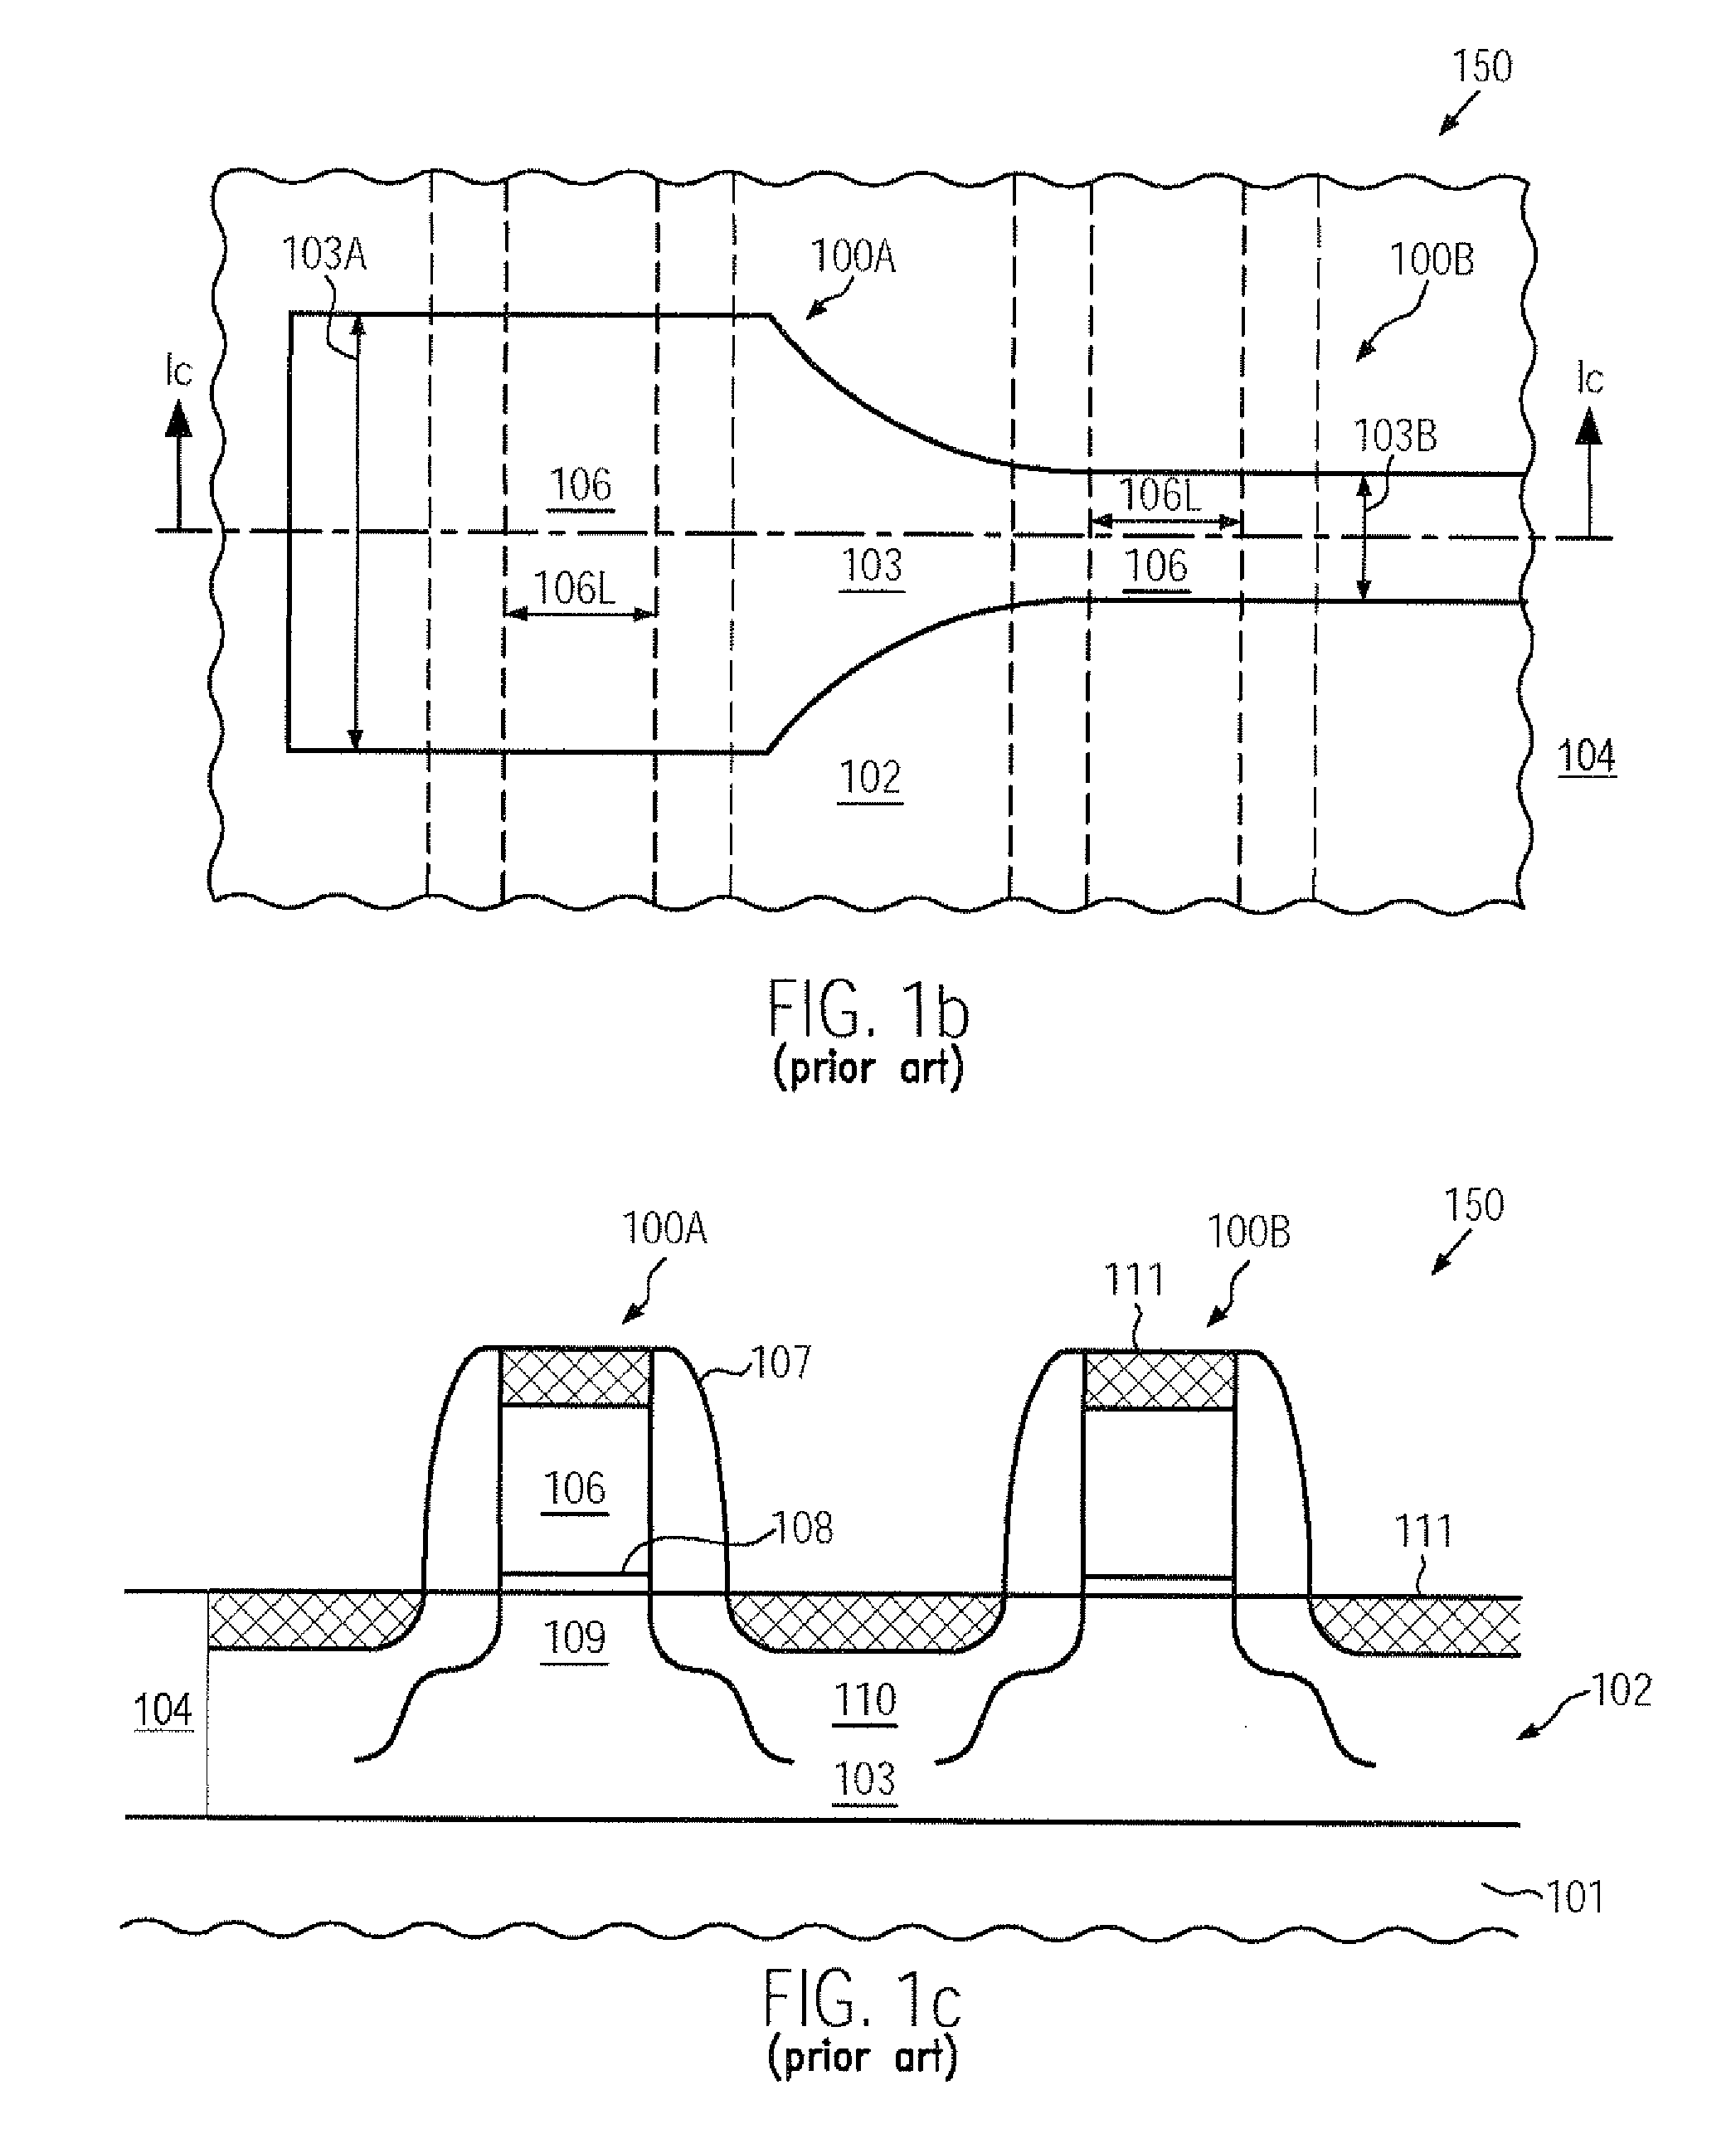 Drive current adjustment for transistors formed in the same active region by locally inducing different lateral strain levels in the active region